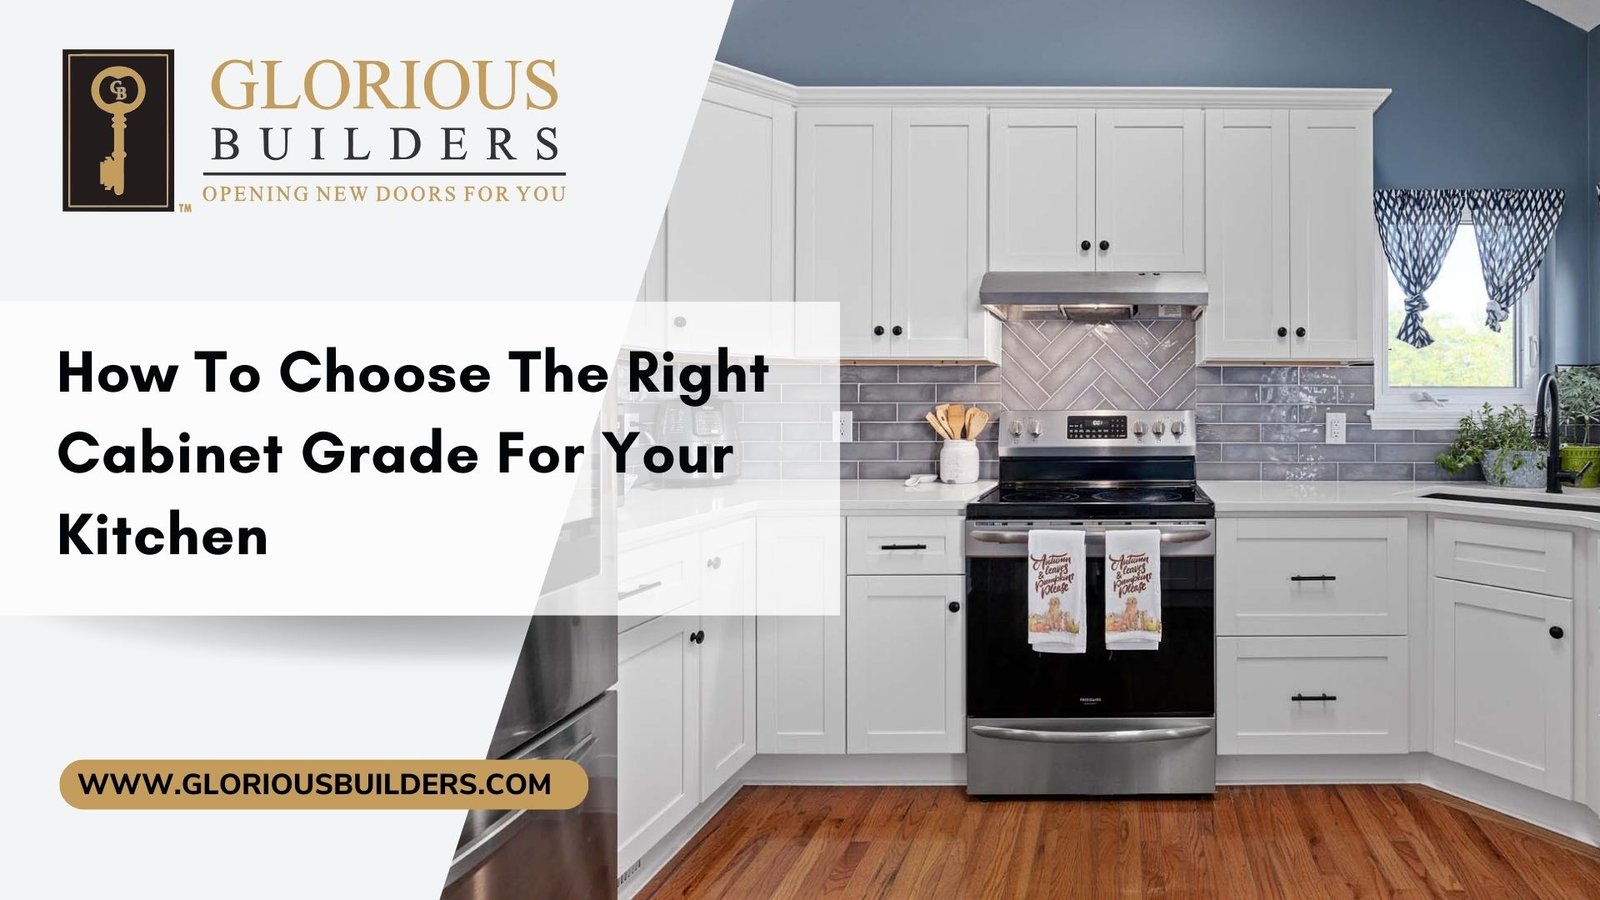 How To Choose The Right Cabinet Grade For Your Kitchen